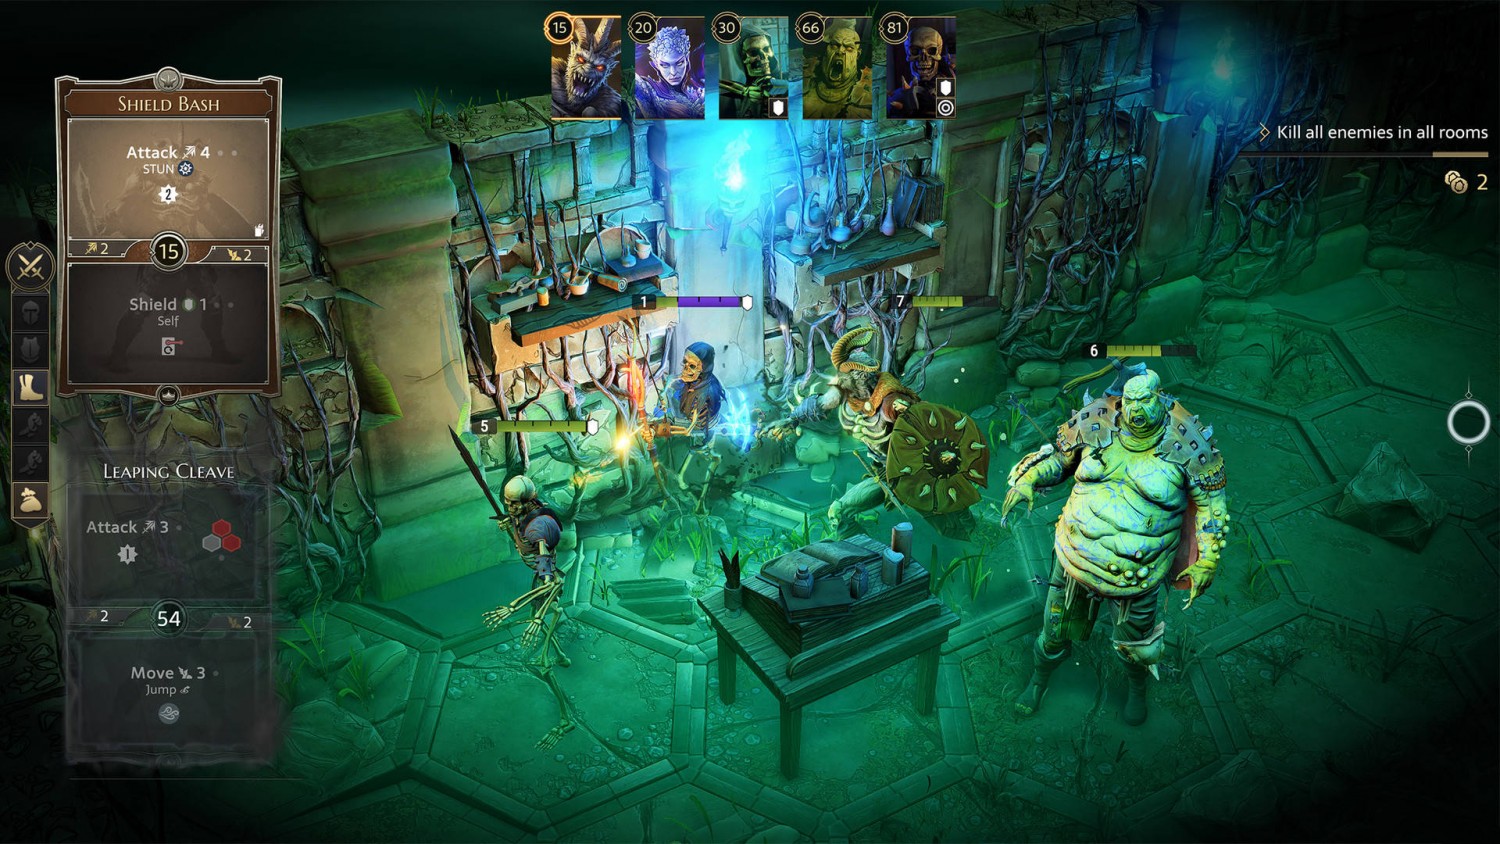 for iphone download Gloomhaven free